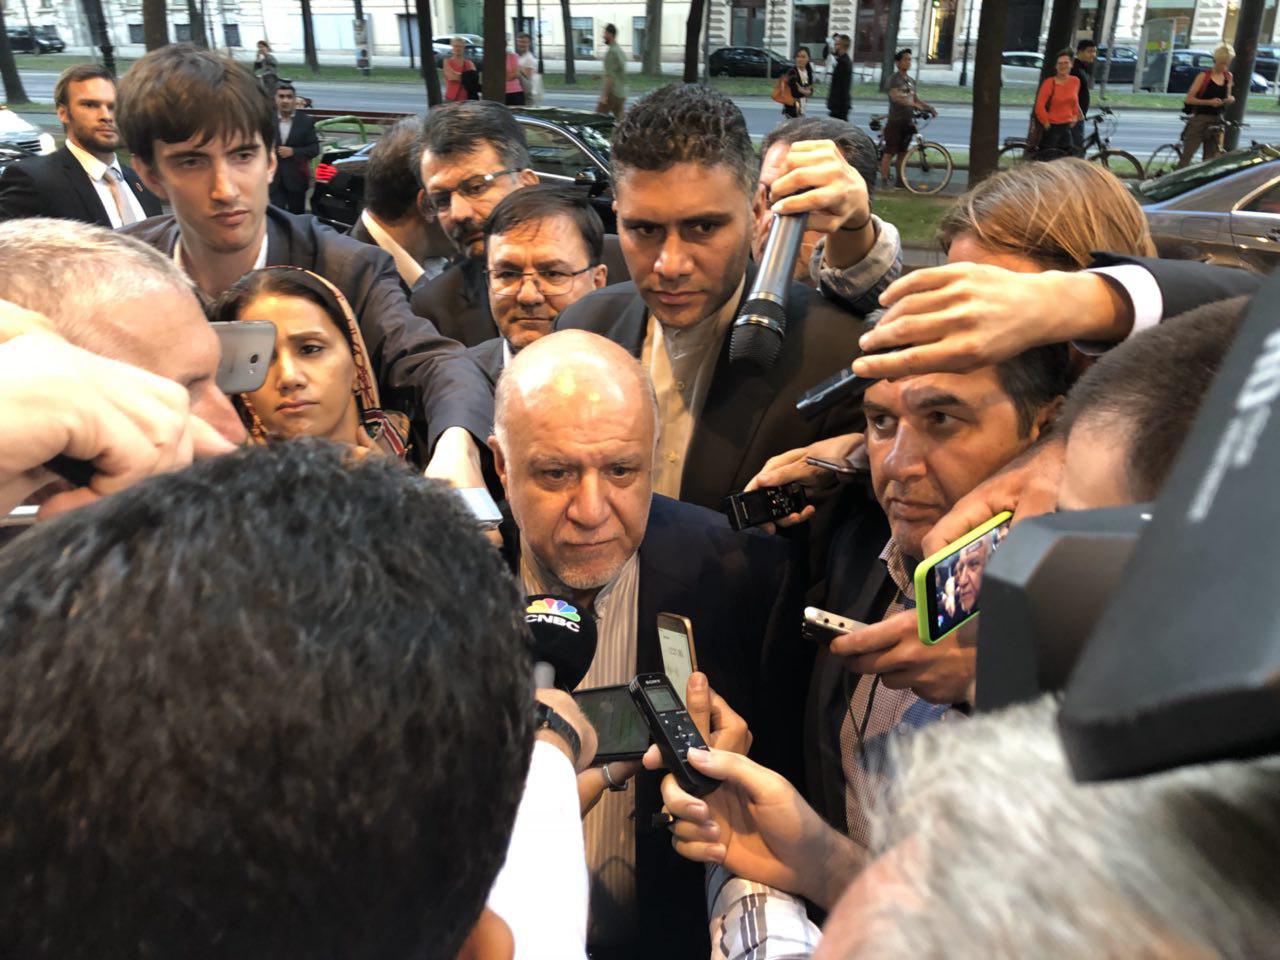 No need for Increased OPEC Output: Zangeneh